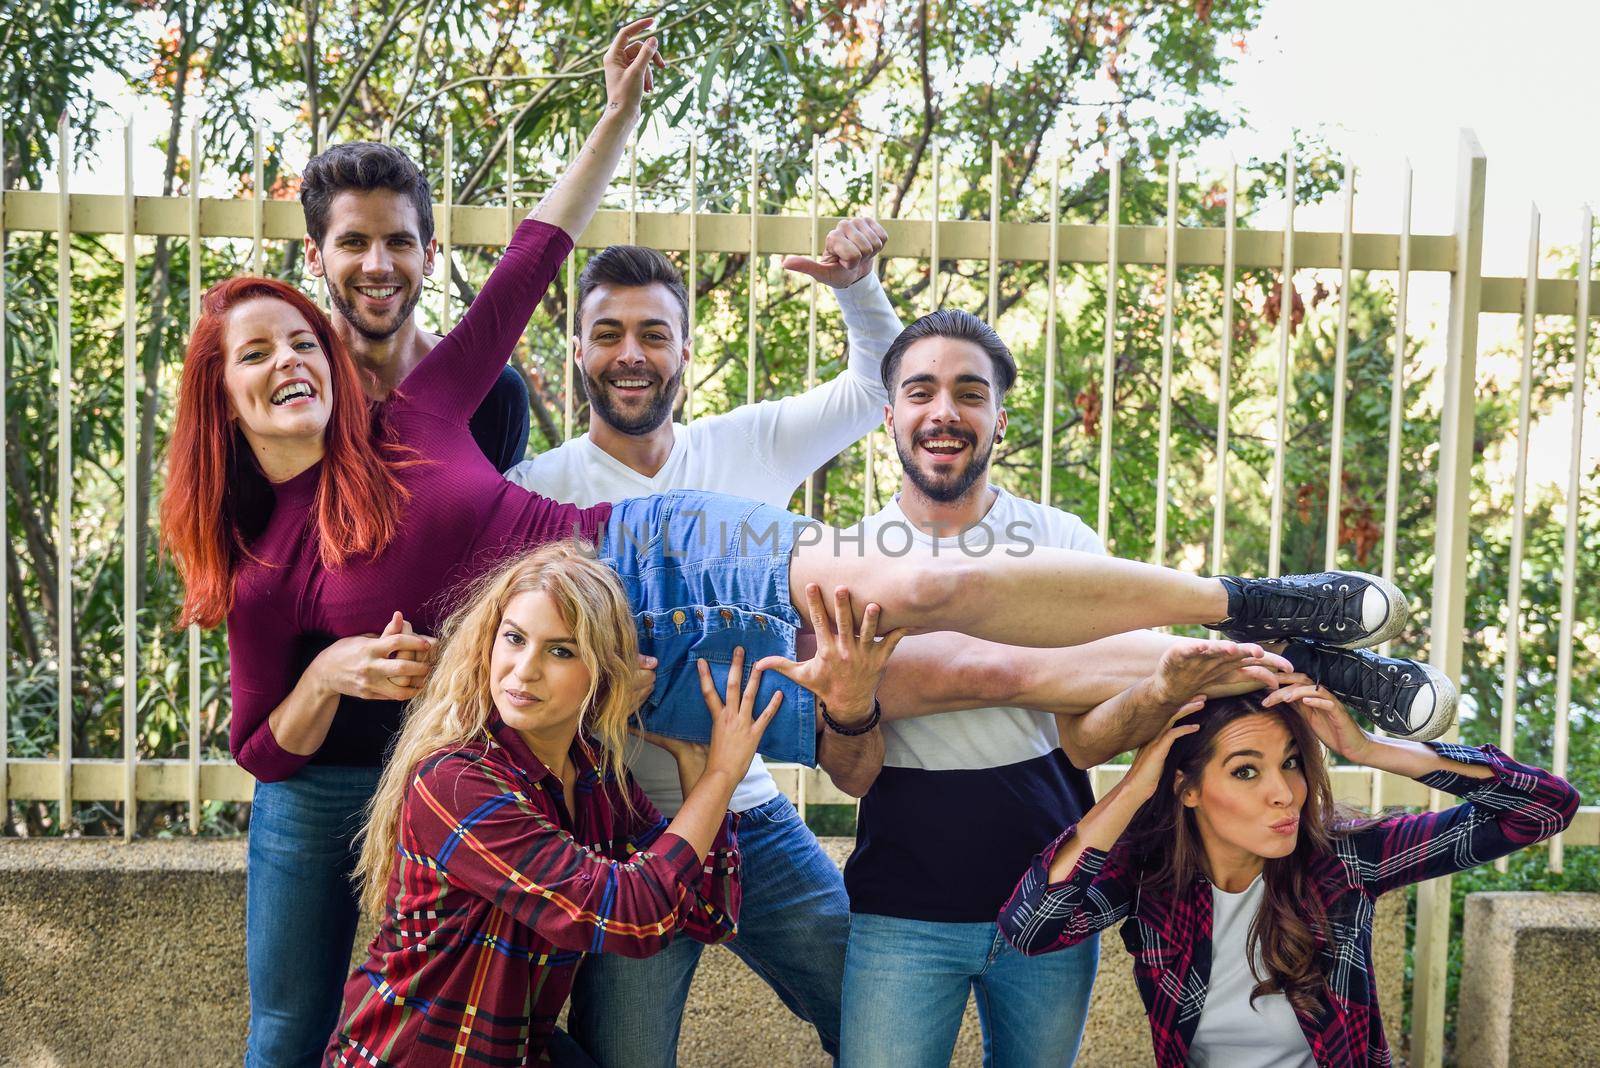 Group portrait of boys and girls with colorful fashionable clothes holding friend. Urban style people having fun - Concepts about youth and togetherness.